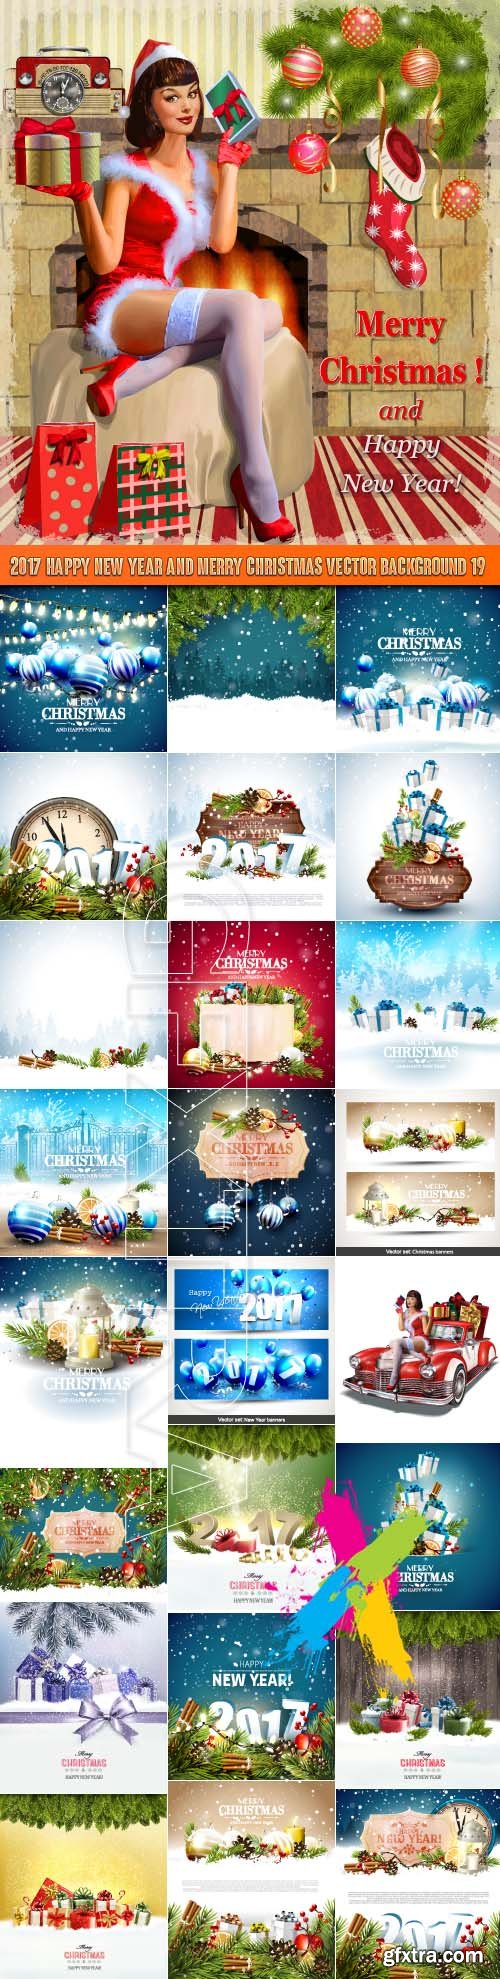 2017 Happy New Year and Merry Christmas vector background 19